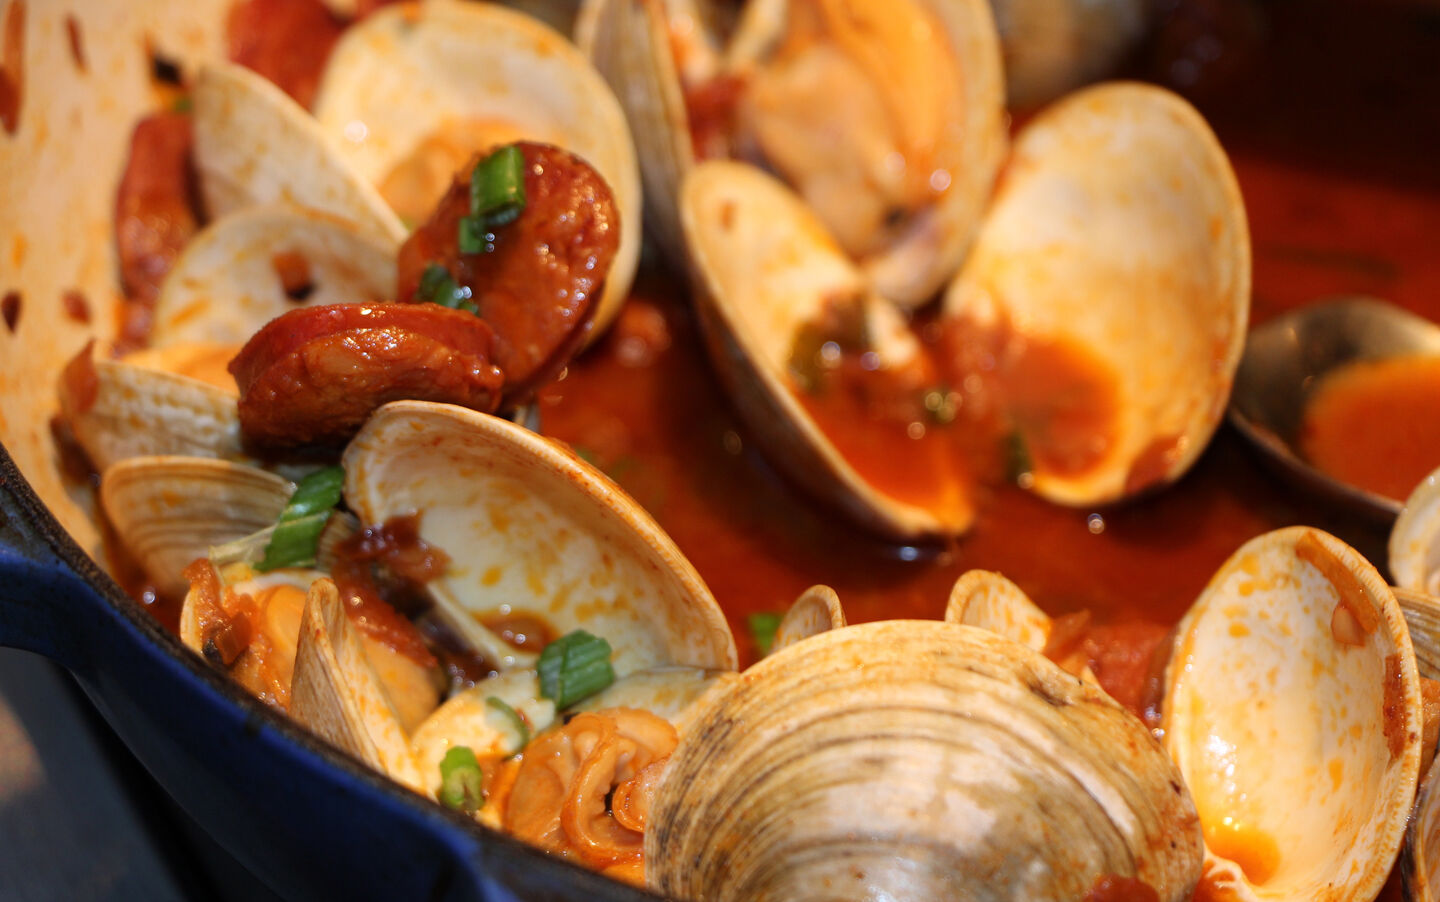 Chorizo and Little Neck Clams in a Spicy Seafood Broth